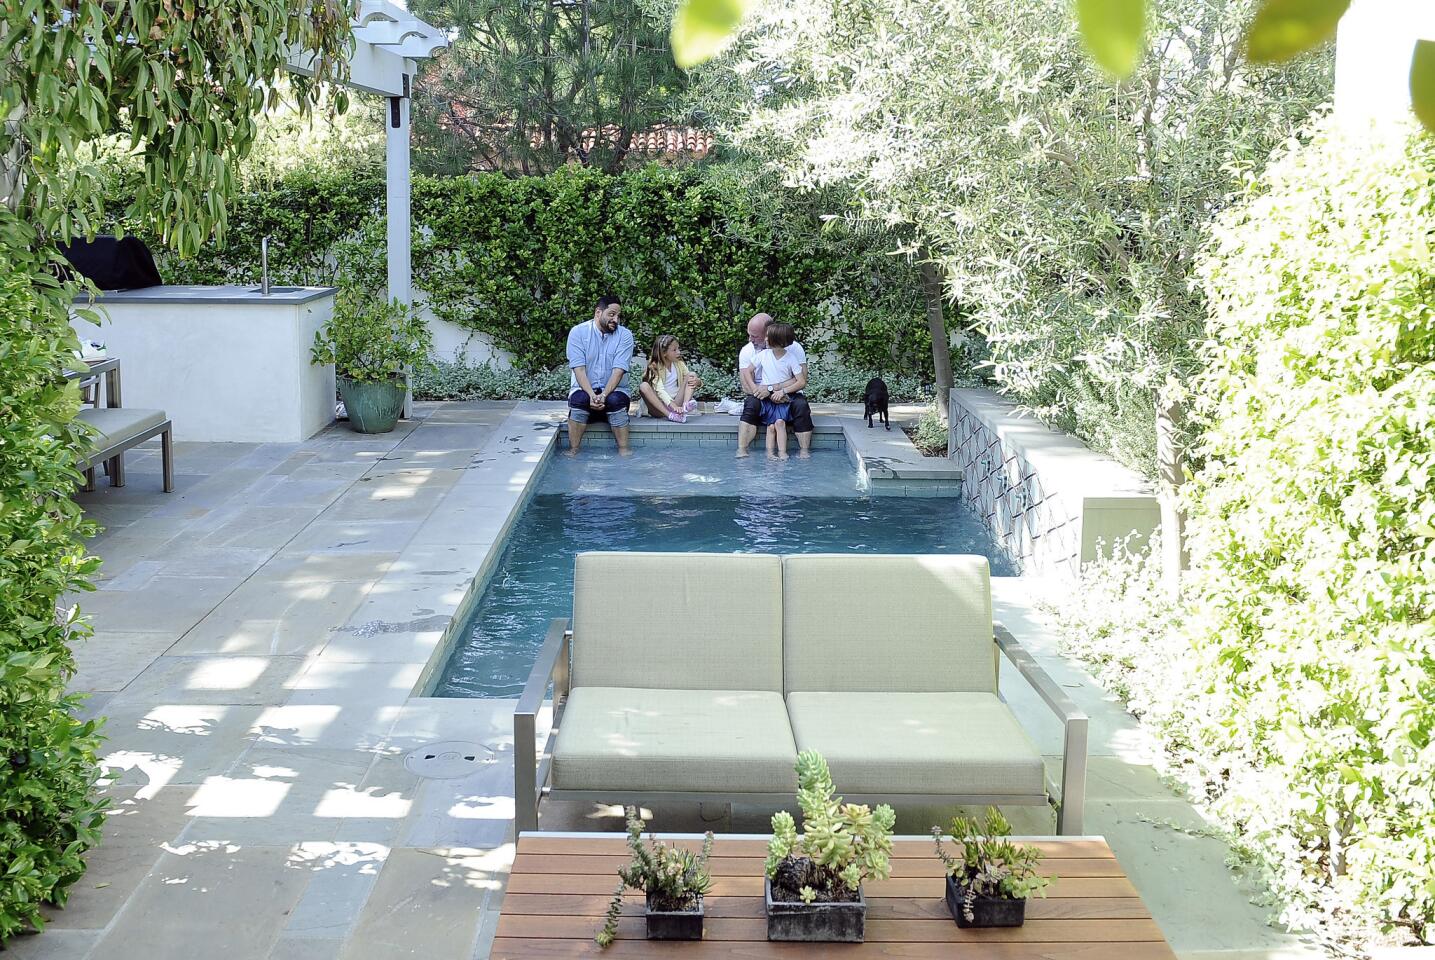 David Collins and partner Joseph Rivas, along with twin daughters Olive and Ella, and dog Coco, relax in their Atwater backyard.